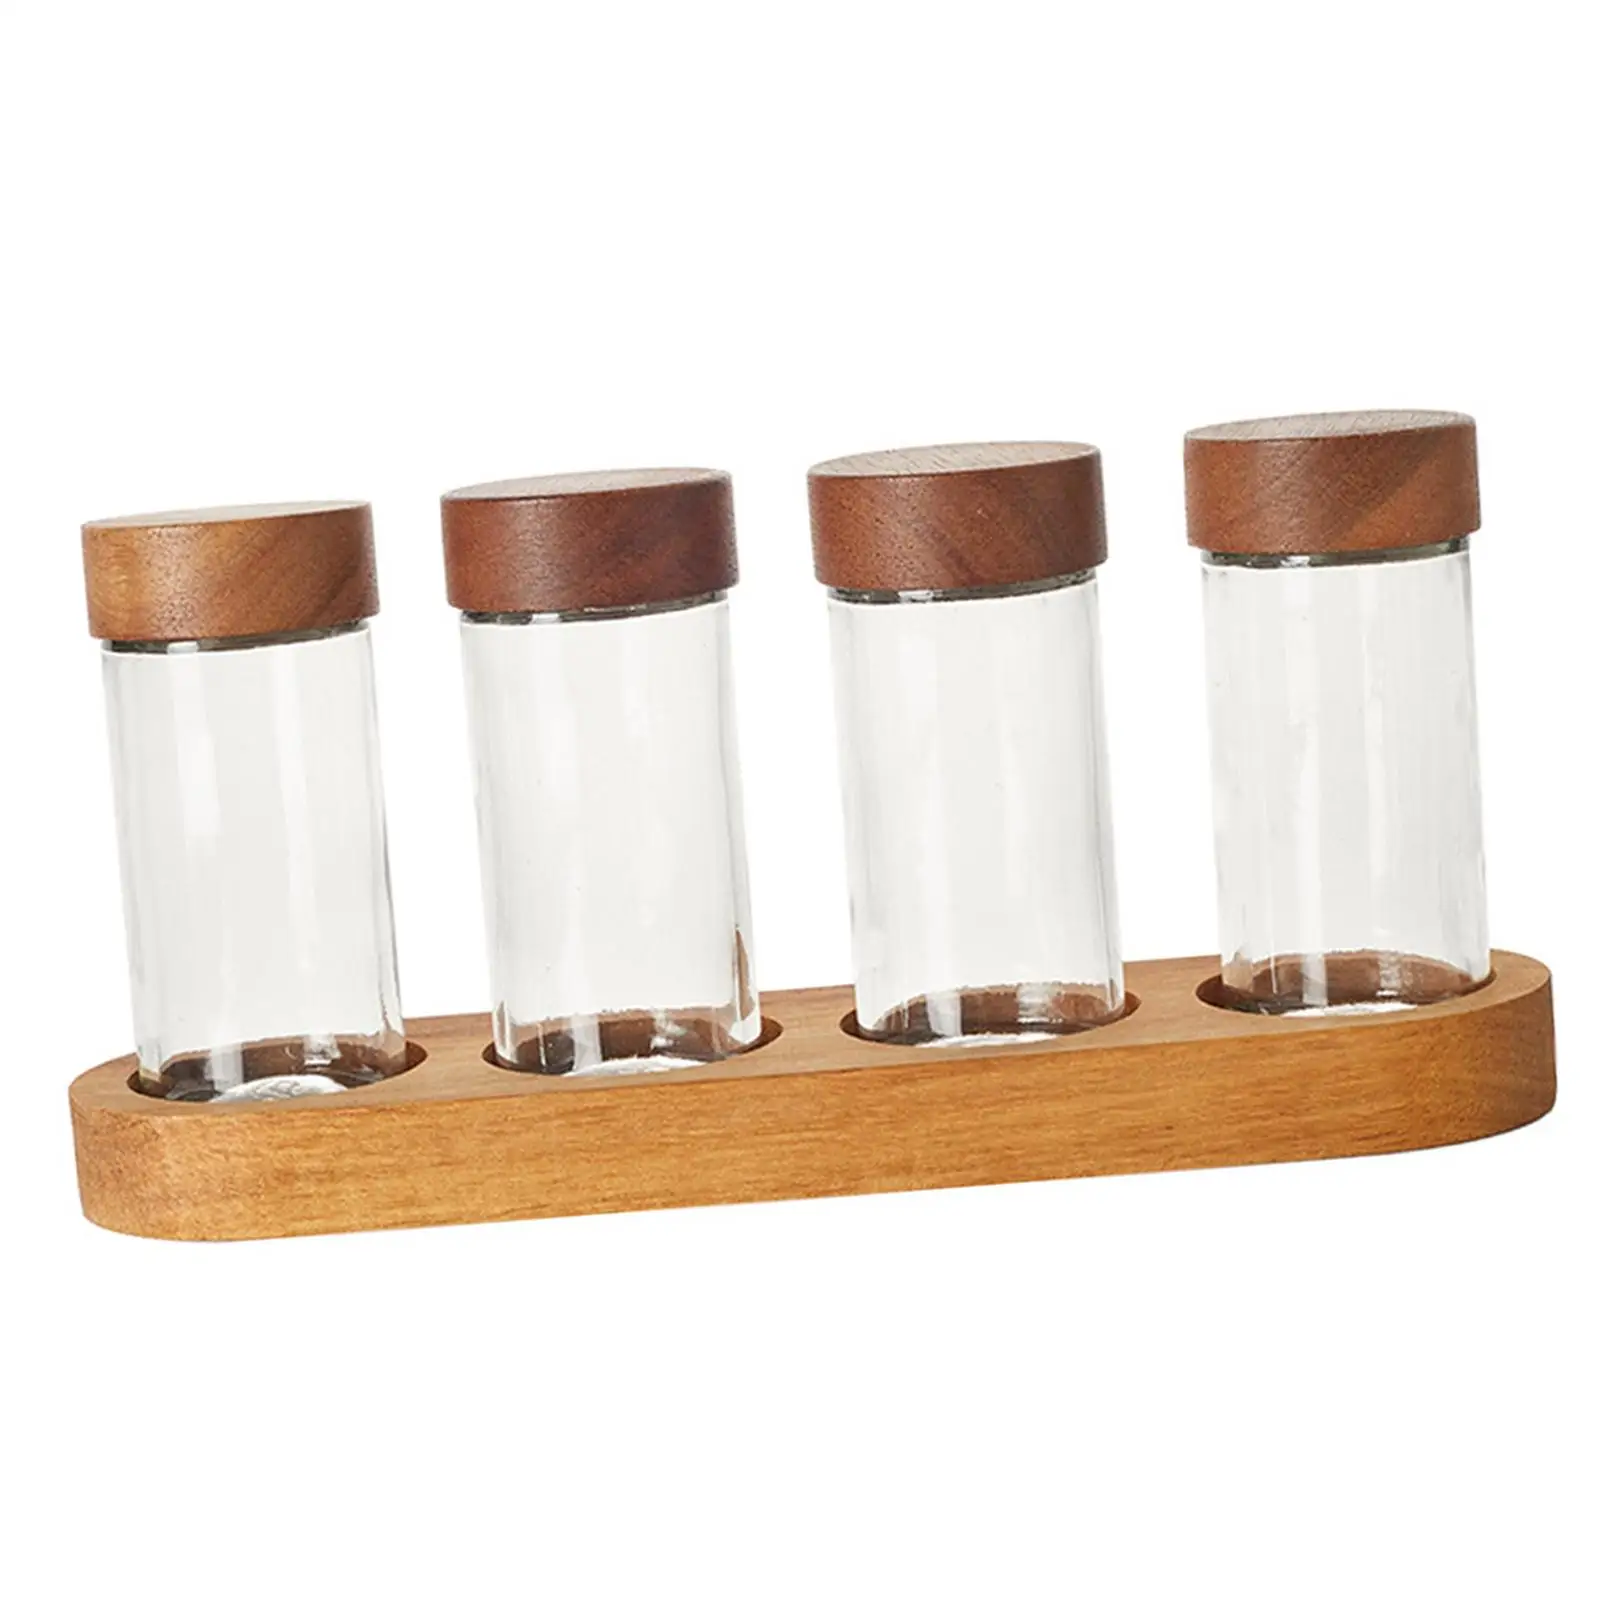 4 Pieces Condiment Jars Set Food Storage Canister Organizer Coffee Bean Storage Tubes for Tea Sugar Pepper Coffee Beans Spice